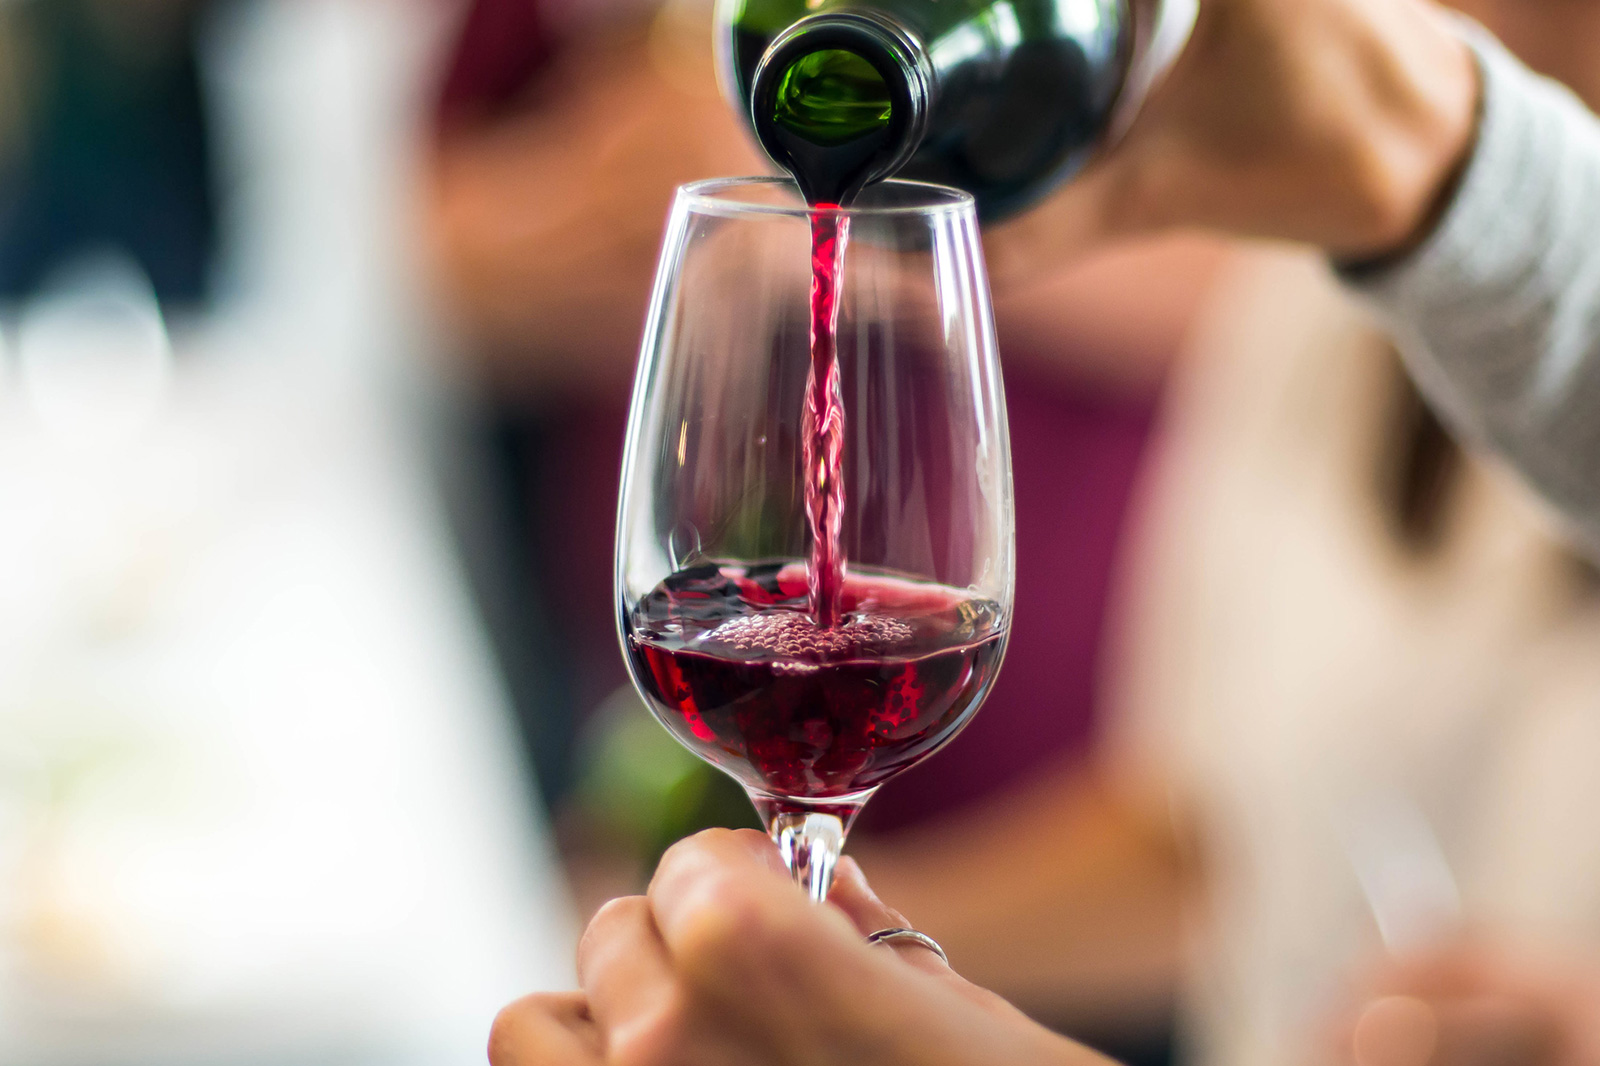 What Are The Side Effects Of Drinking A Glass Of Wine Daily?